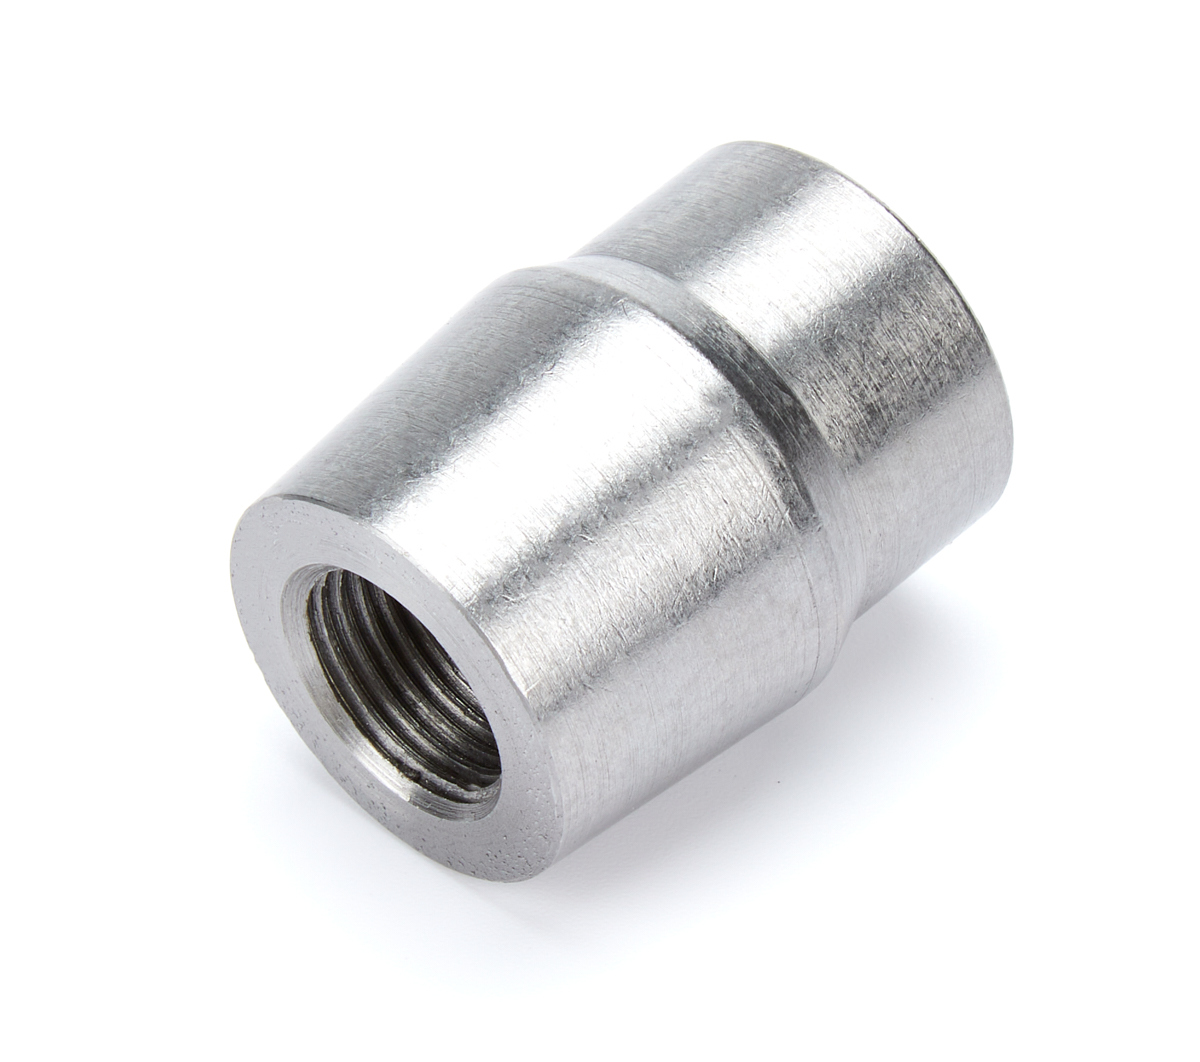 FK Rod Ends 2307 Tube End, Weld-On, 5/8-18 in Right Hand Female Thread, 1-1/8 in Tube, 0.058 in Tube Wall, Chromoly, Natural, Each